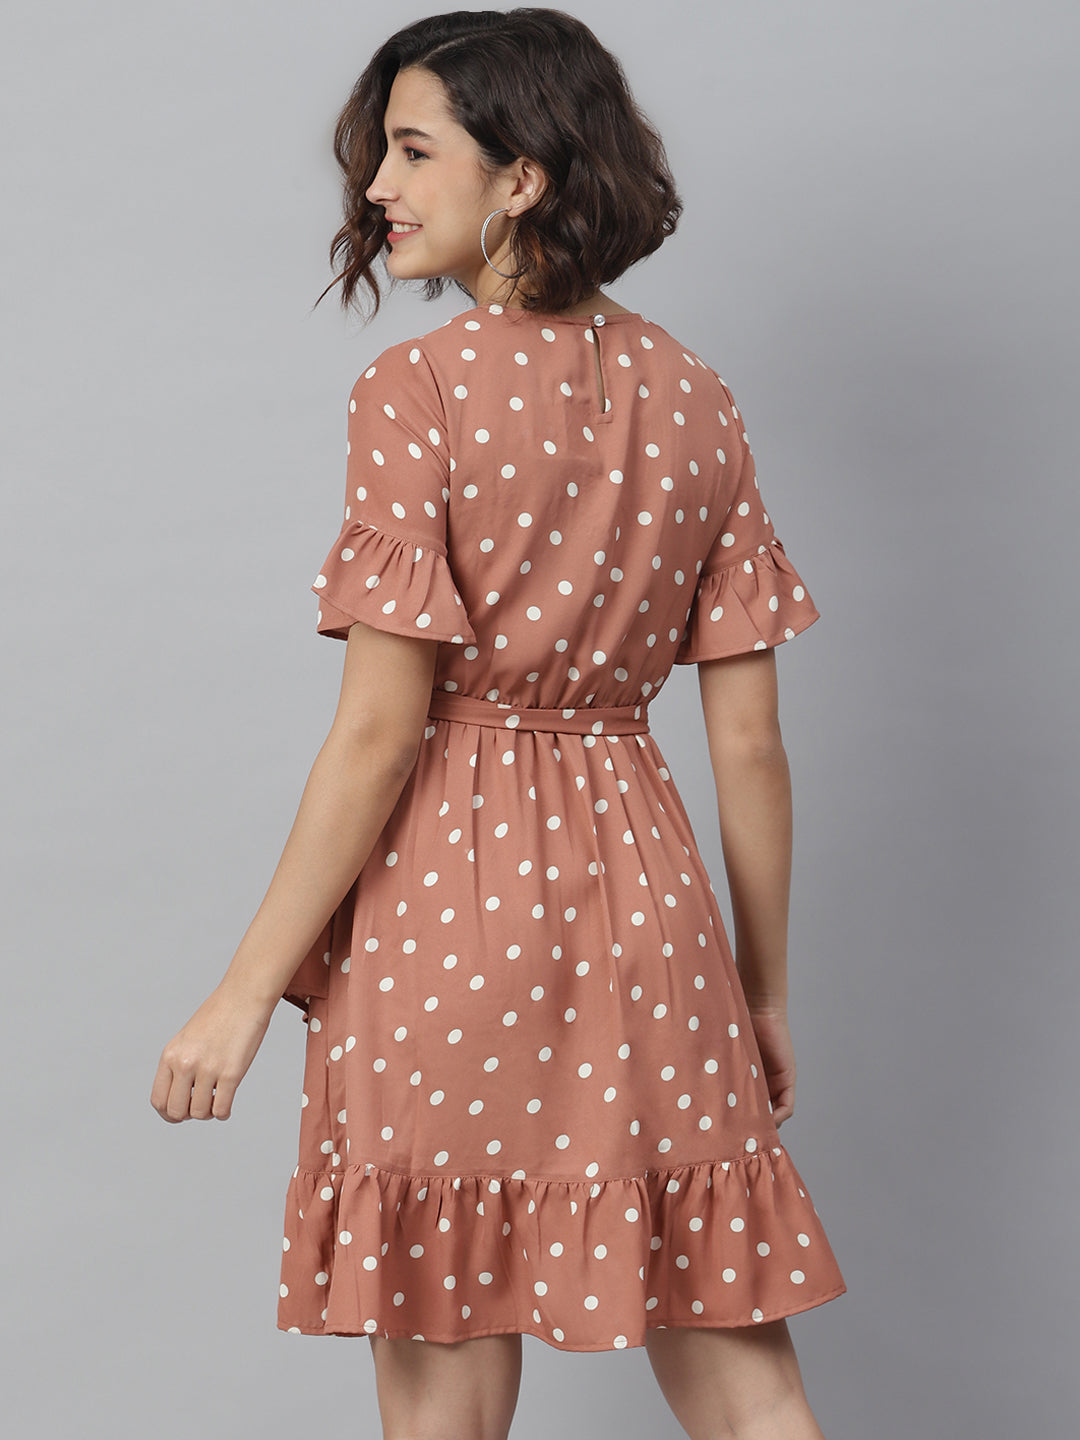 Women's Brown Polka Dress with Lace detail